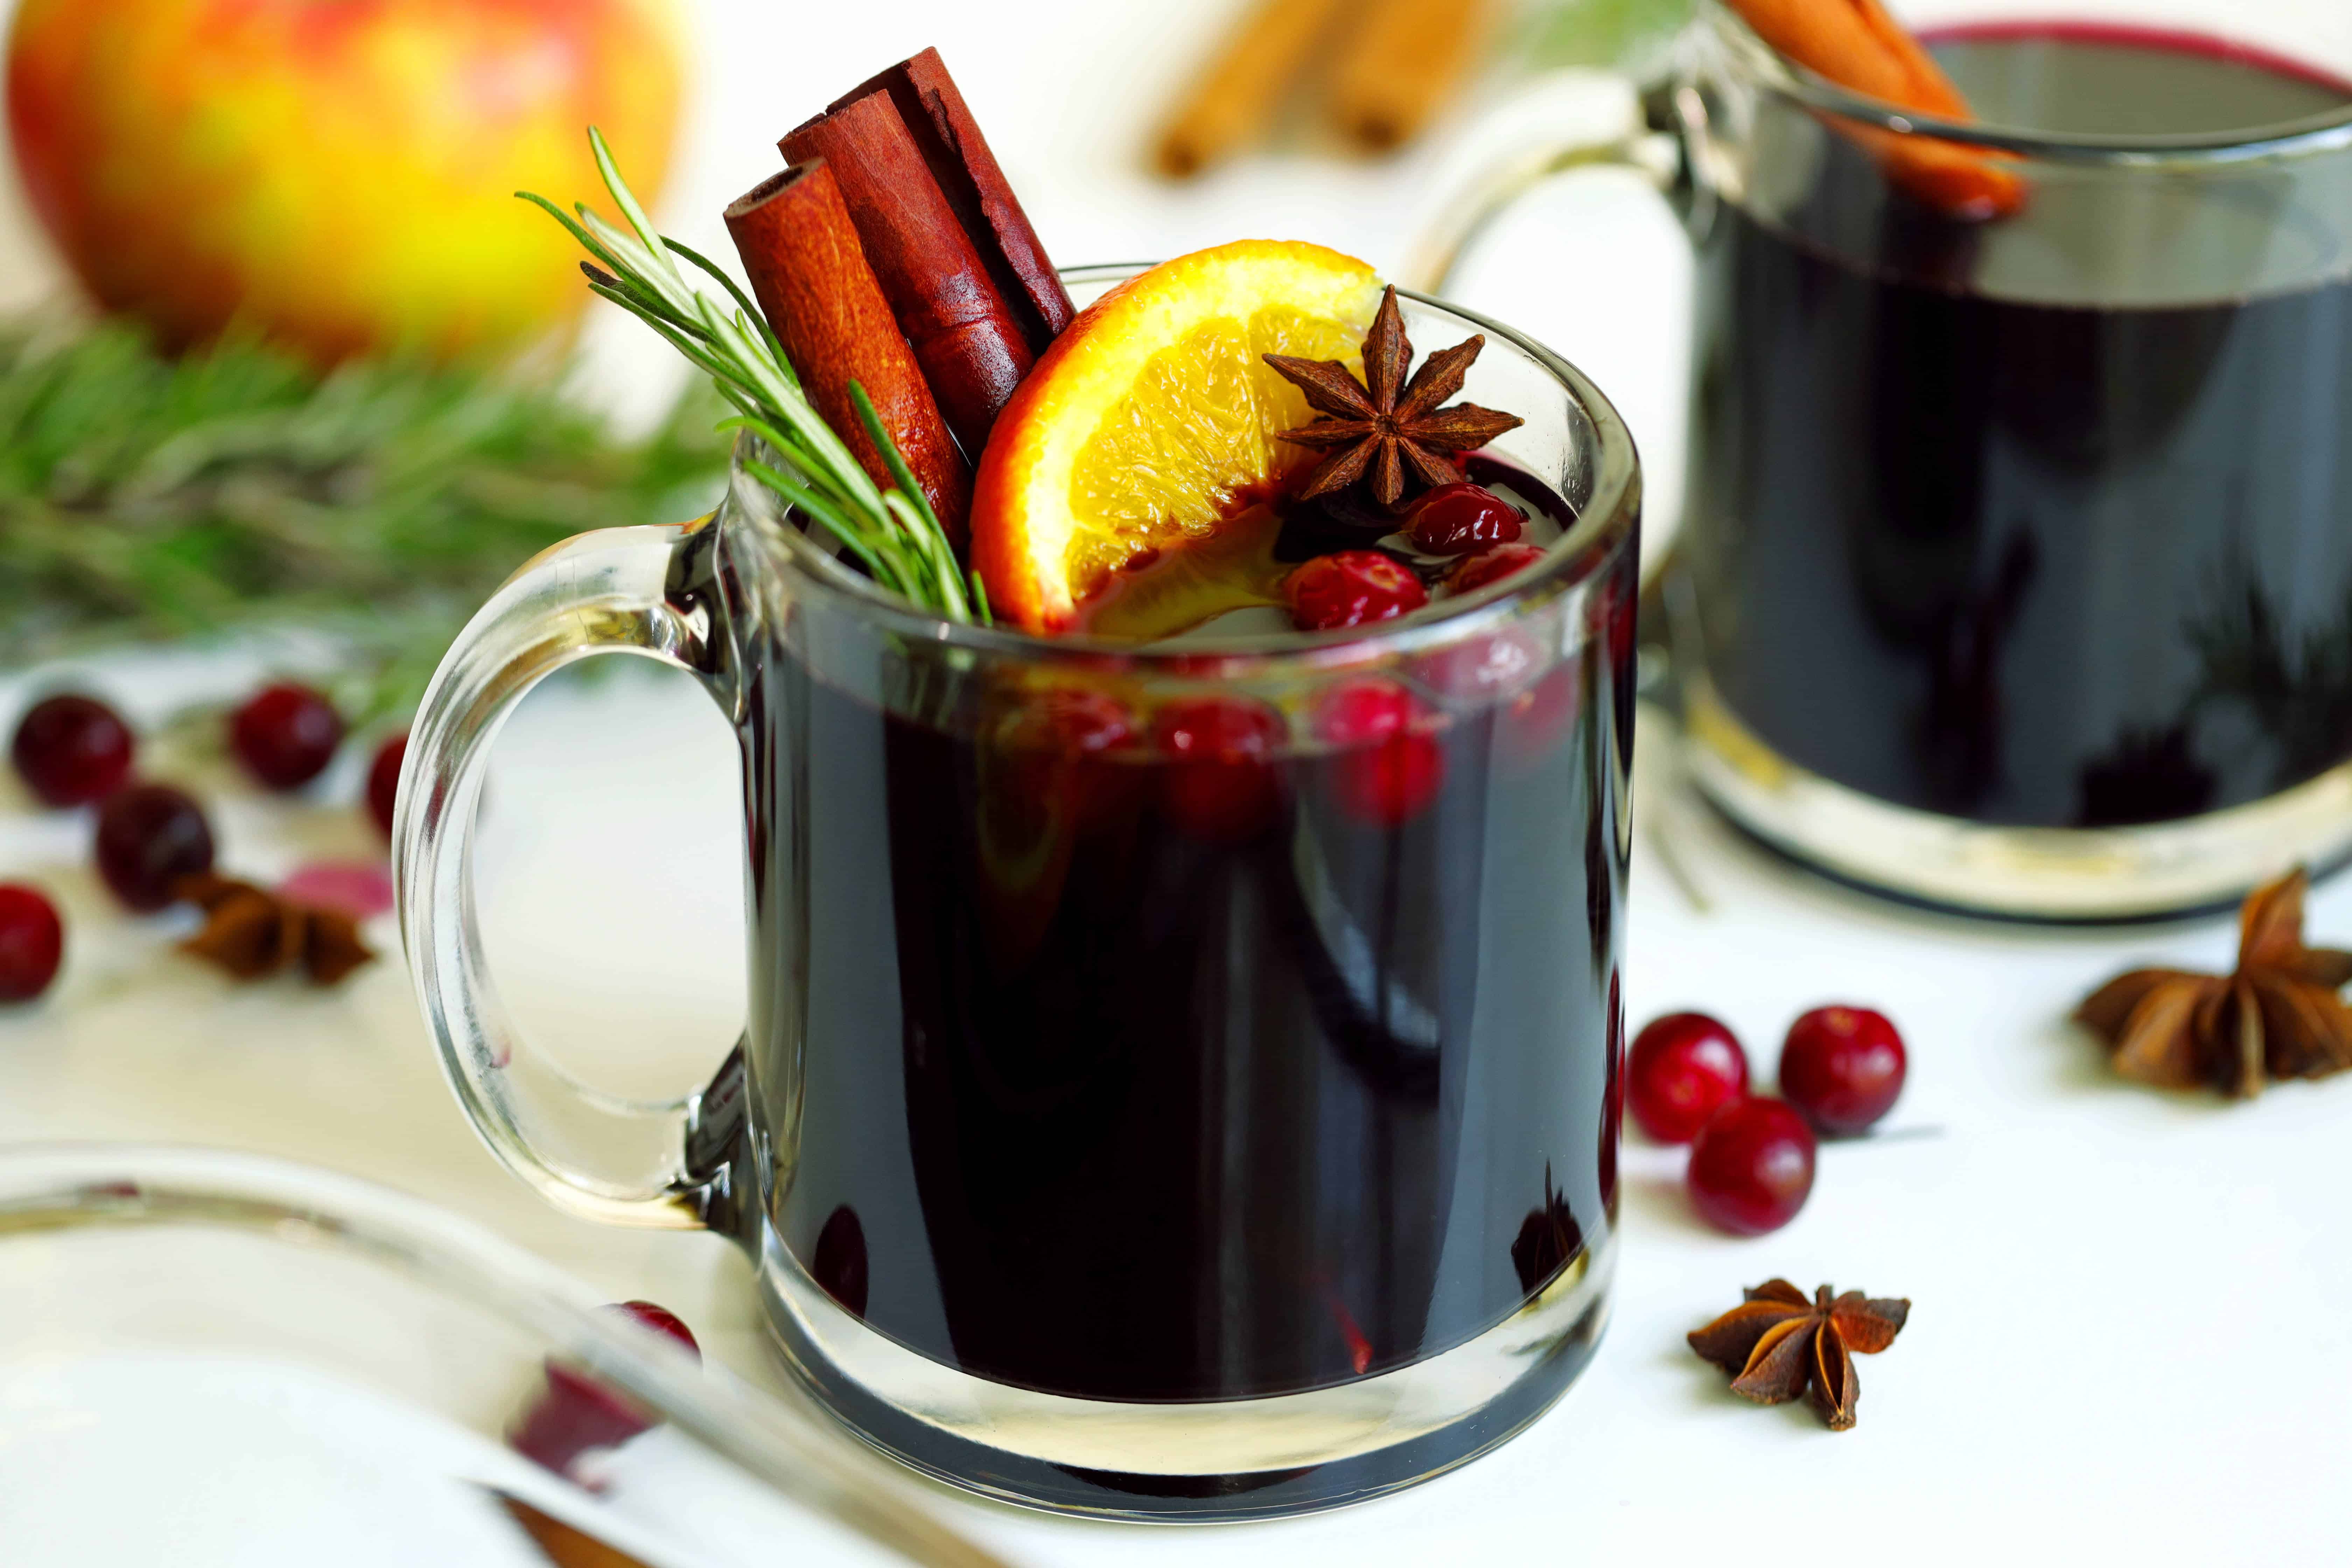 Clear mug on a white table cloth, holding the red Mulled Cider cocktail. Garnished with red cranberries, rosemary sprig, orange slice, cinnamon sticks, and a star anise.